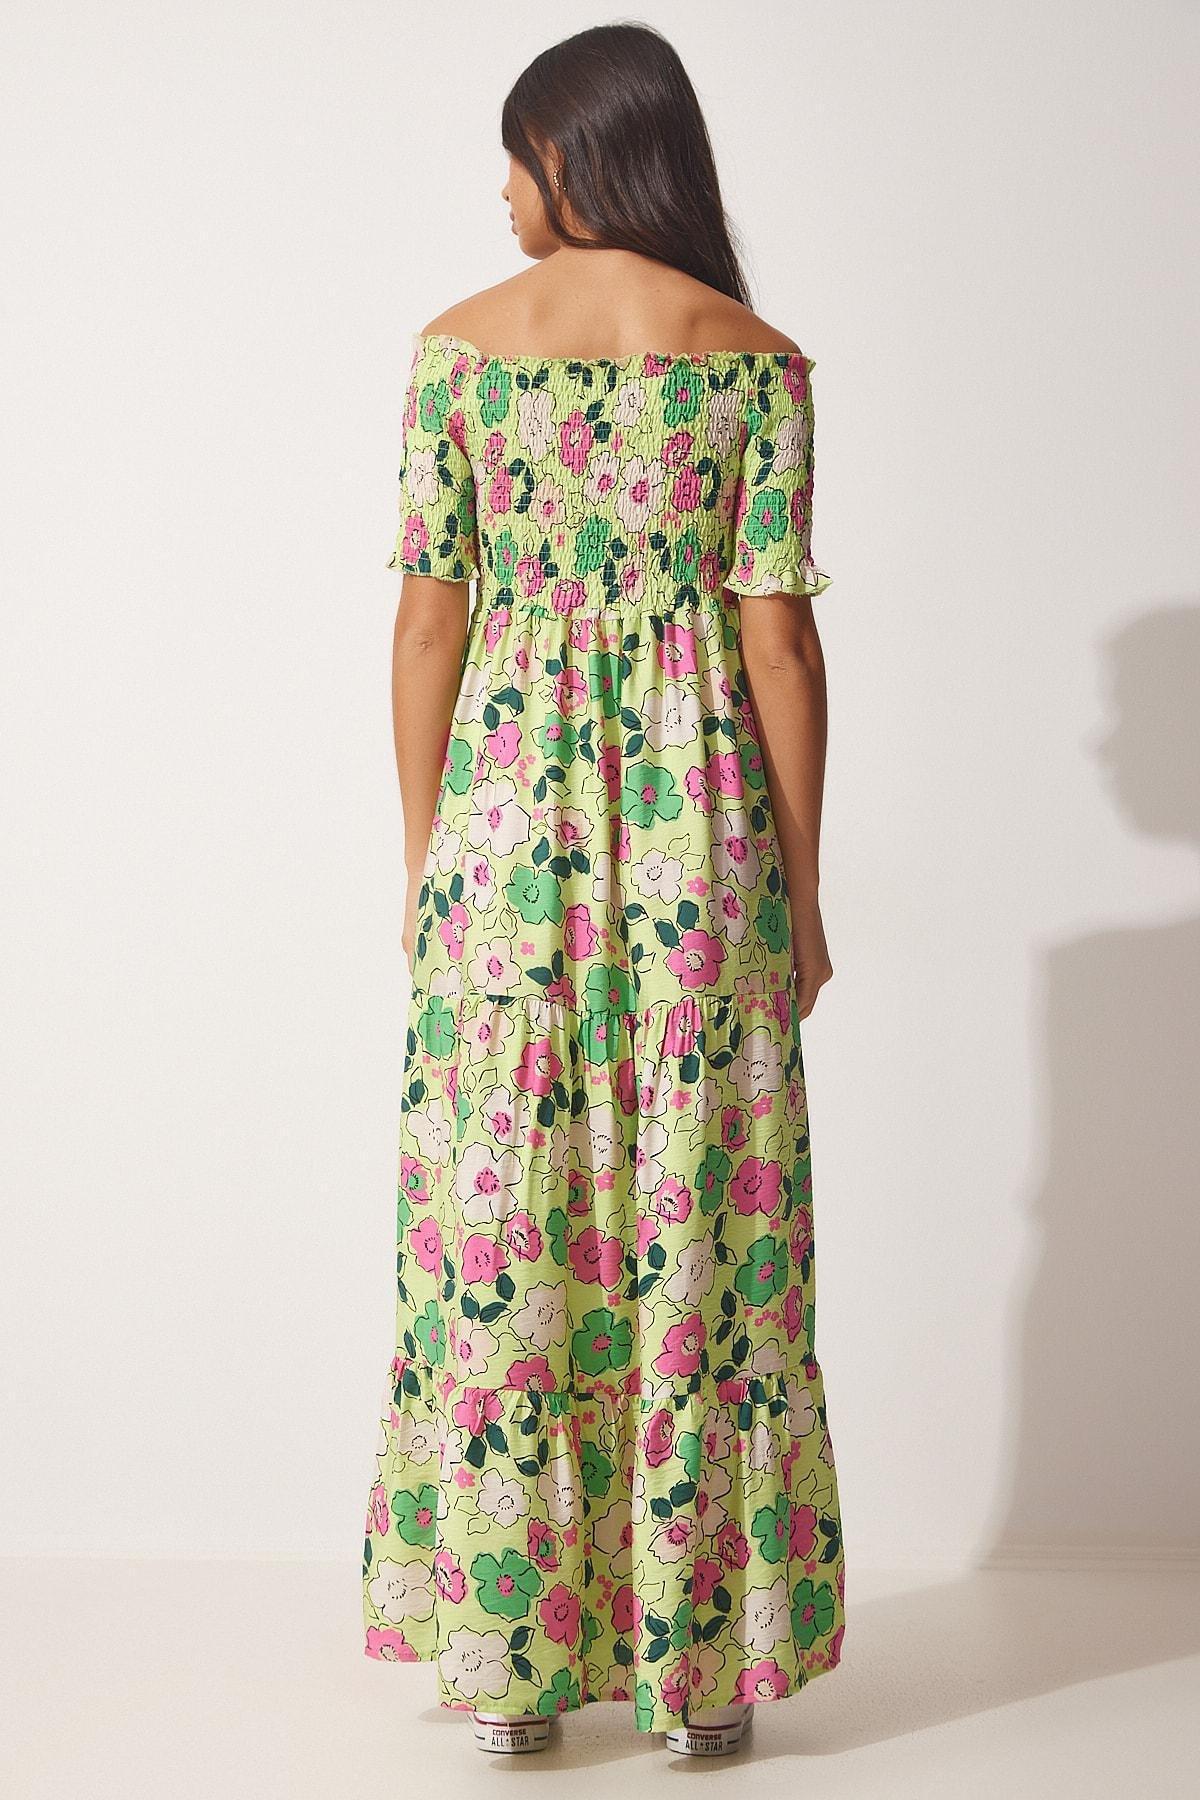 Happiness Istanbul - Green Floral A-Line Dress